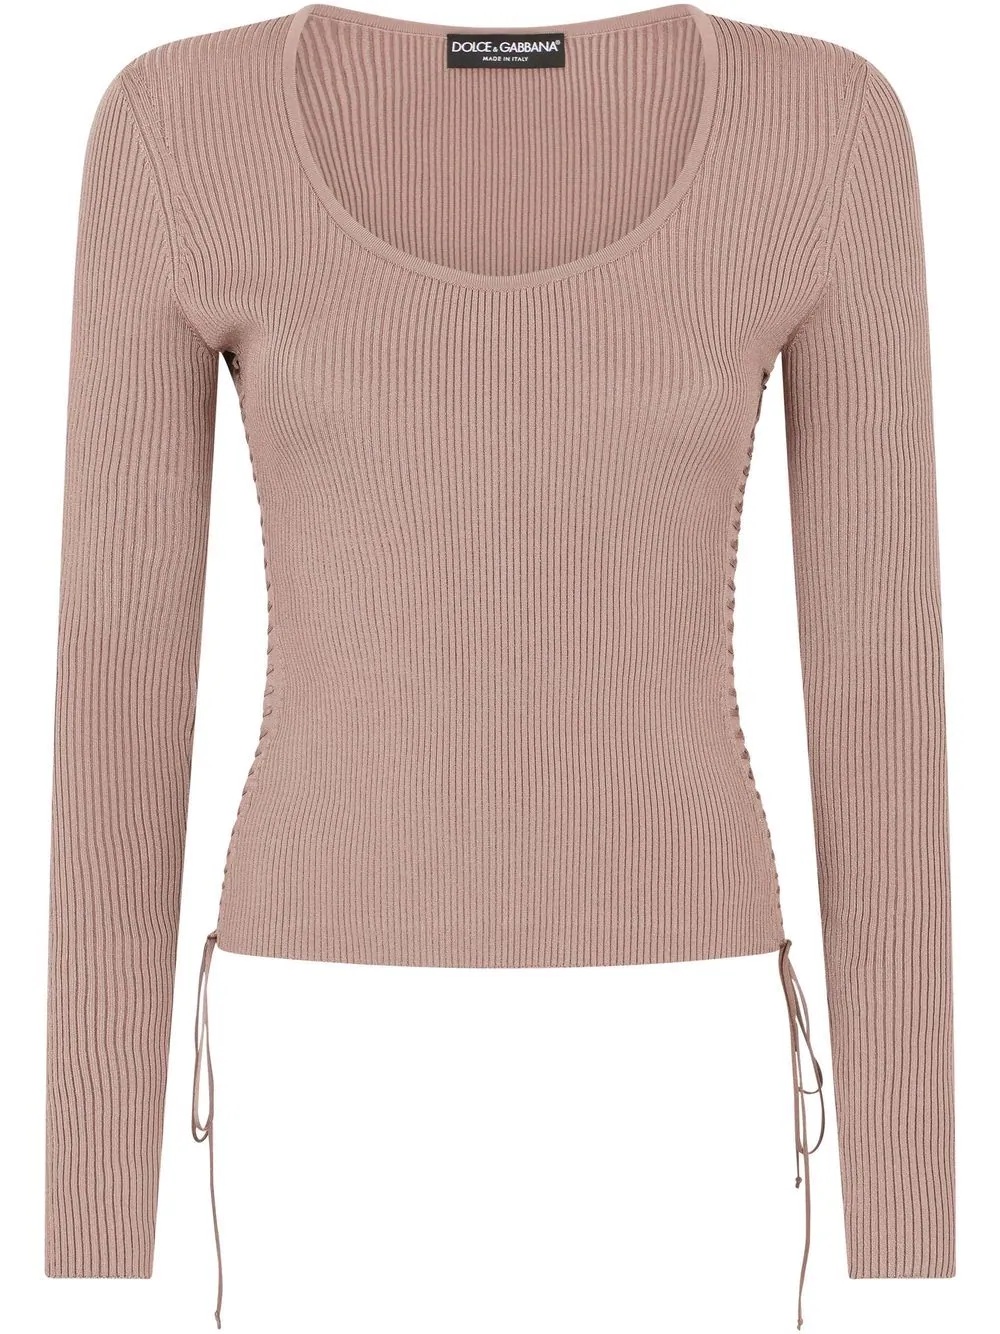 ribbed knitted top - 1